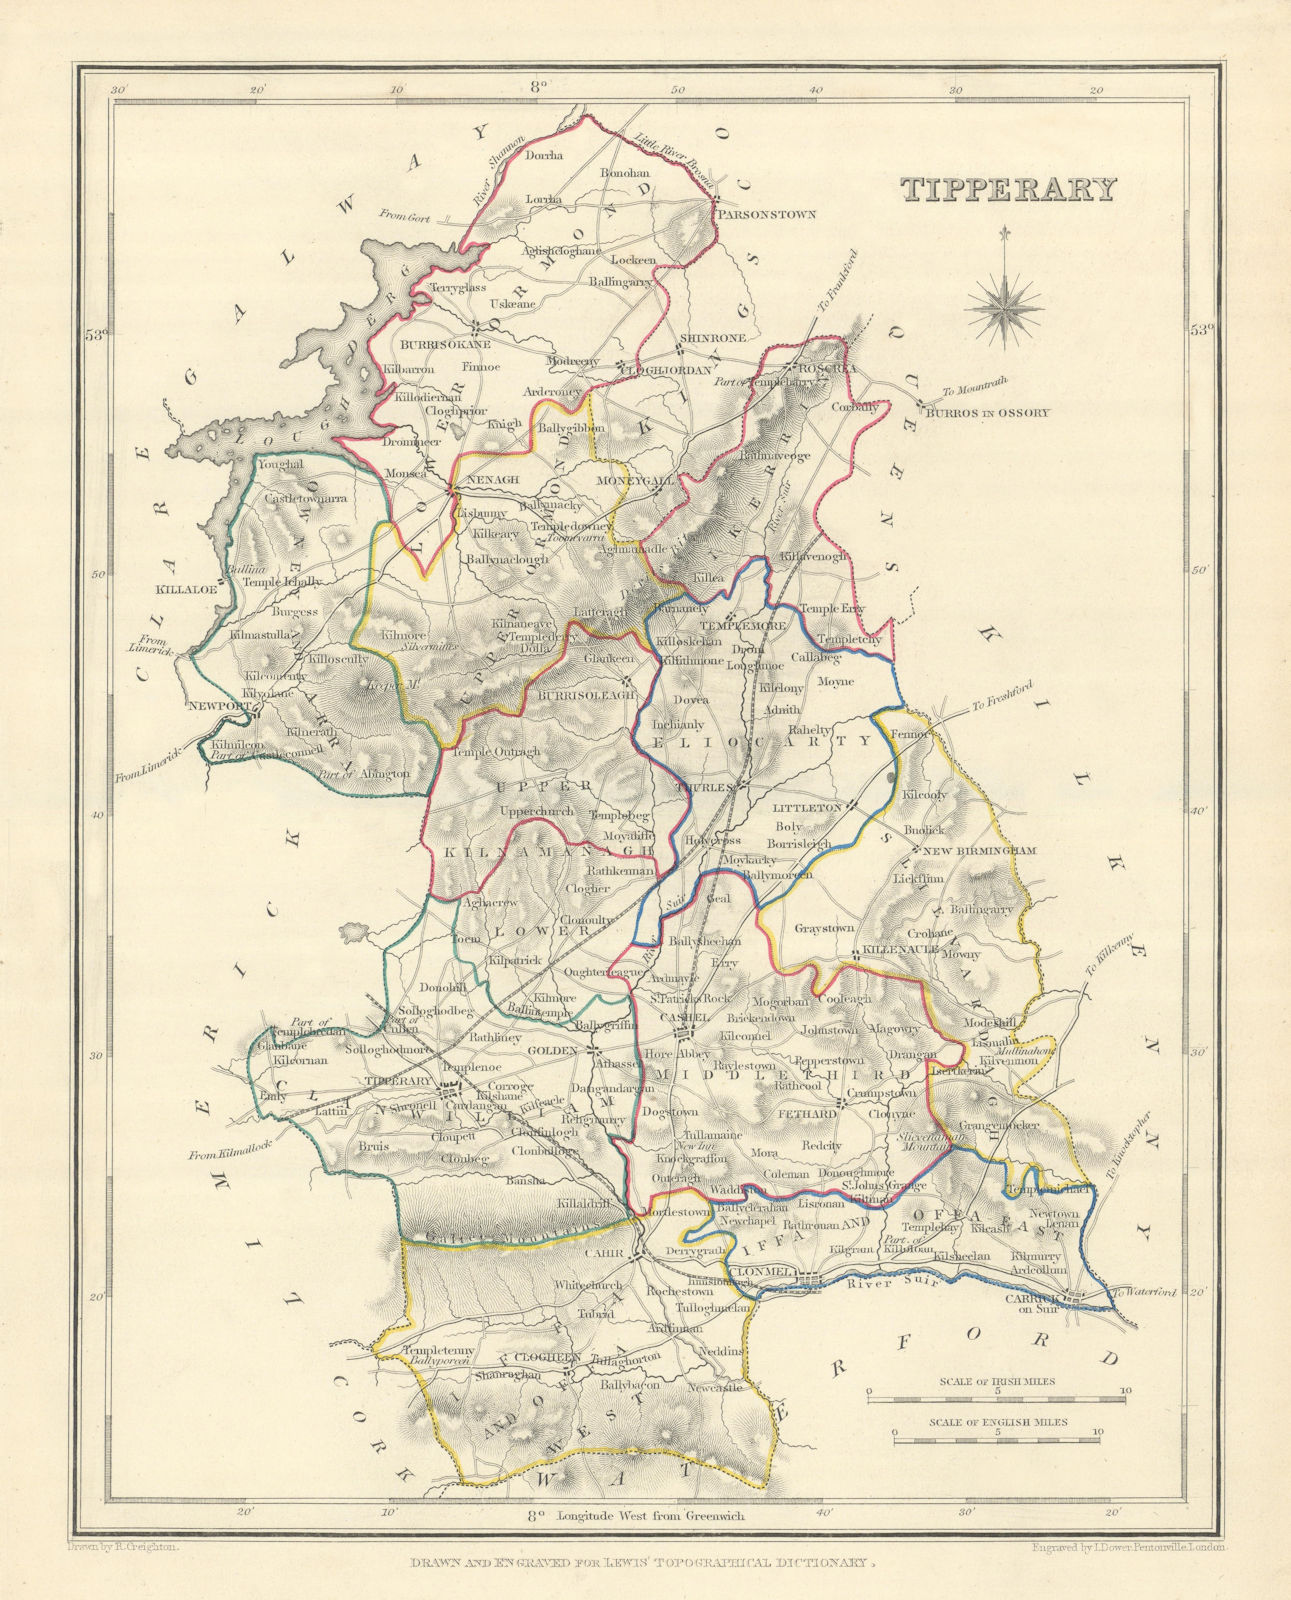 Associate Product COUNTY TIPPERARY antique map for LEWIS by CREIGHTON & DOWER. Ireland 1850